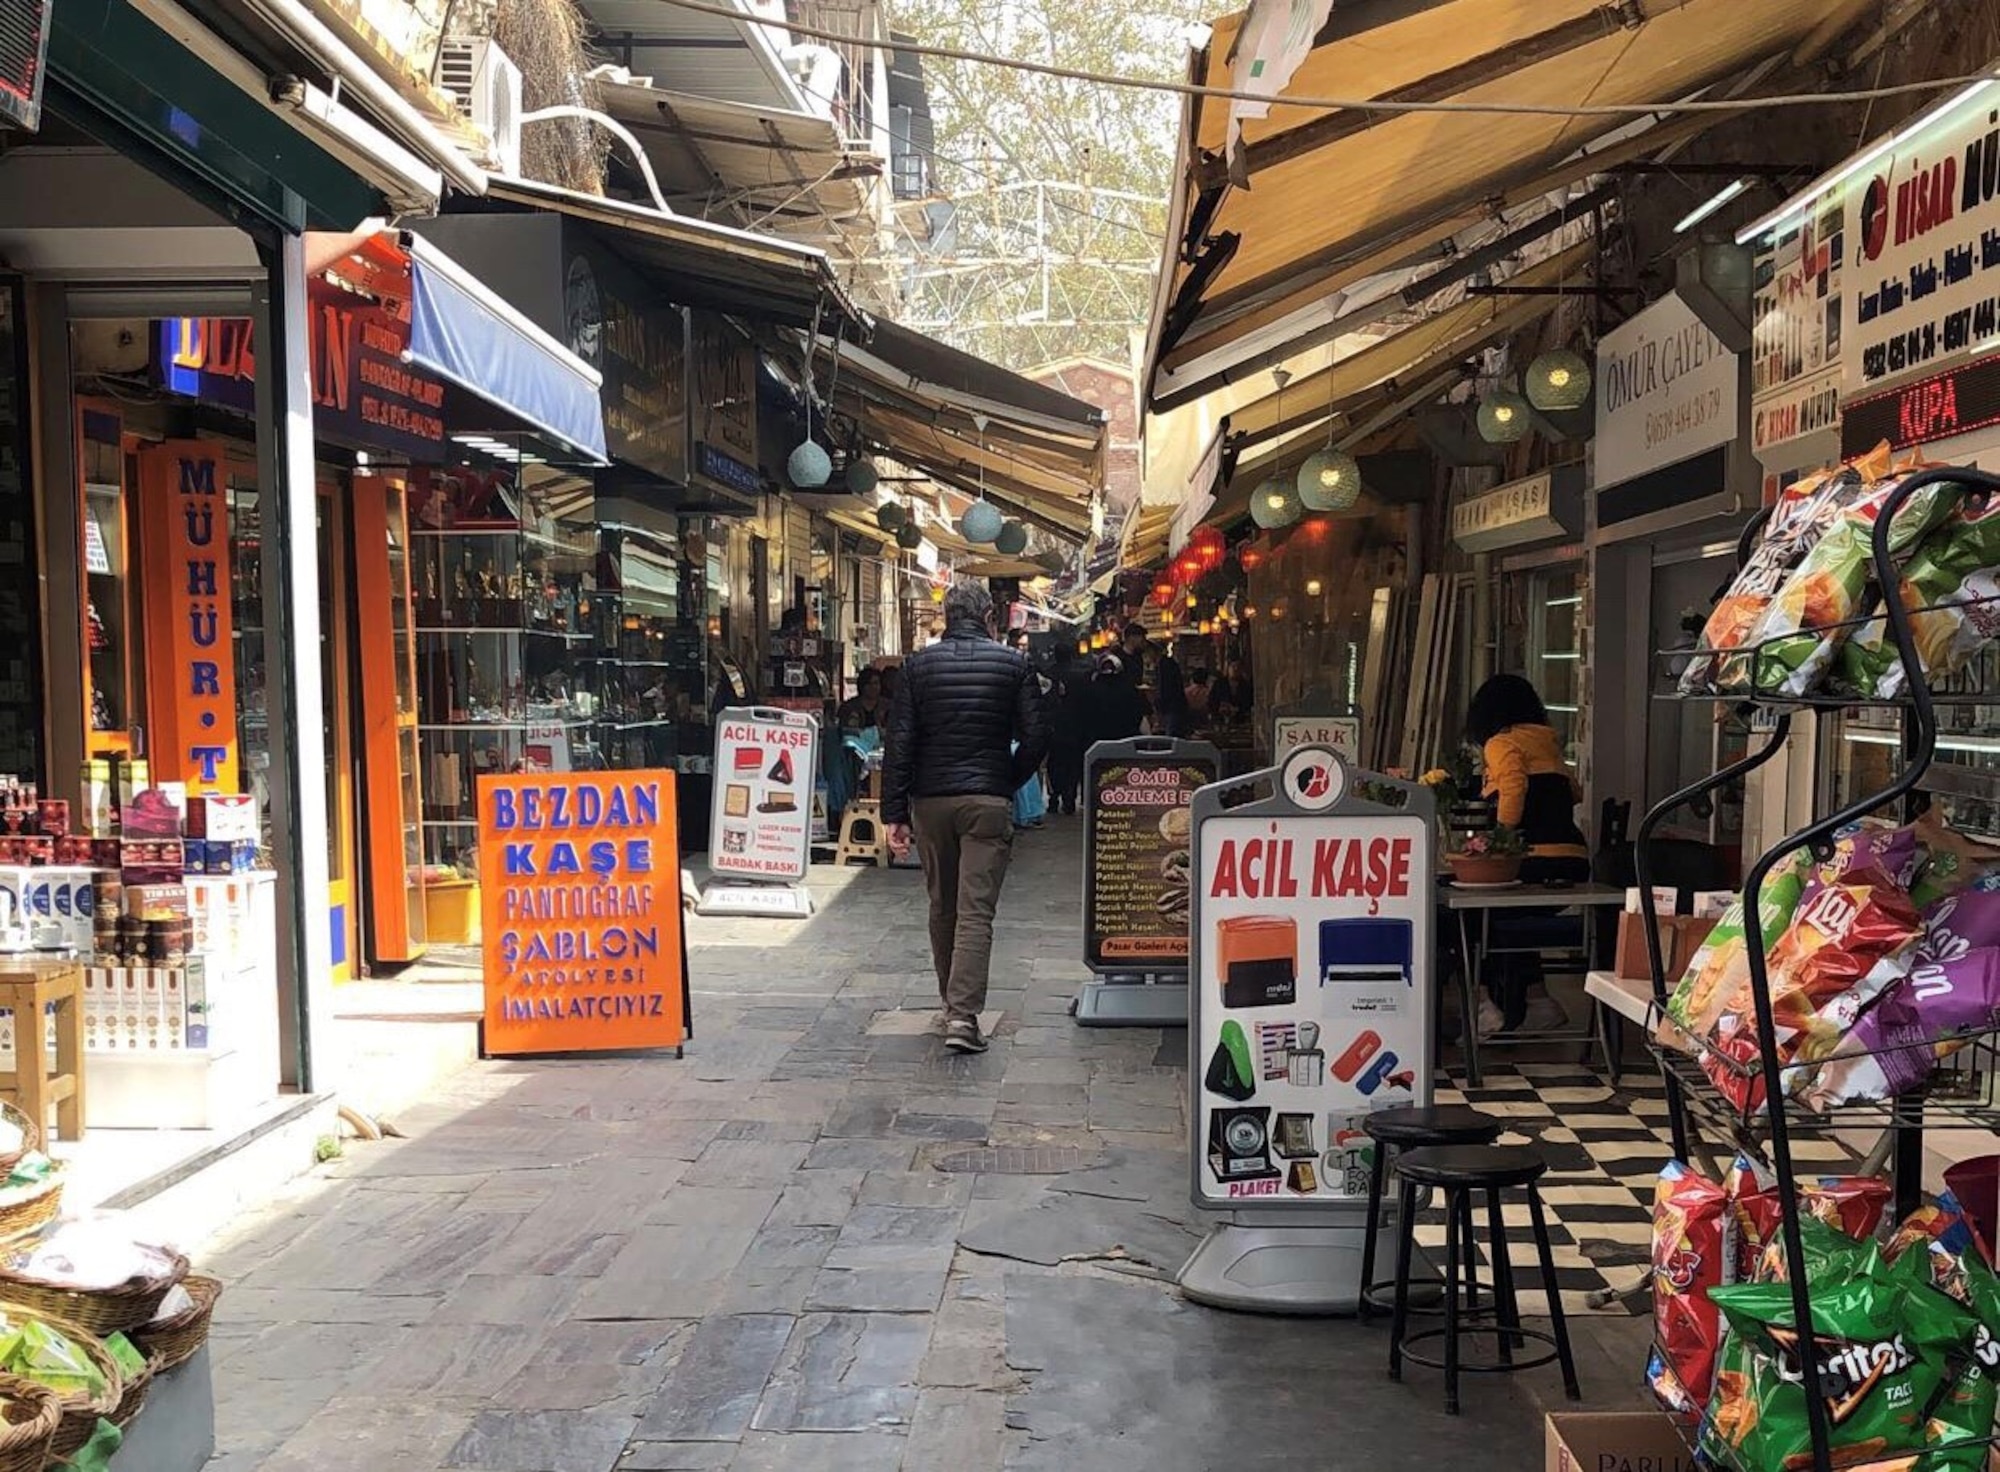 Local markets selling a variety of goods fill the streets in Izmir, Turkey, March 22, 2019. Airmen assigned to the 425th Air Base Squadron shop at the markets for items like fruit, vegetables, nuts, clothes and household items. (Courtesy photo)